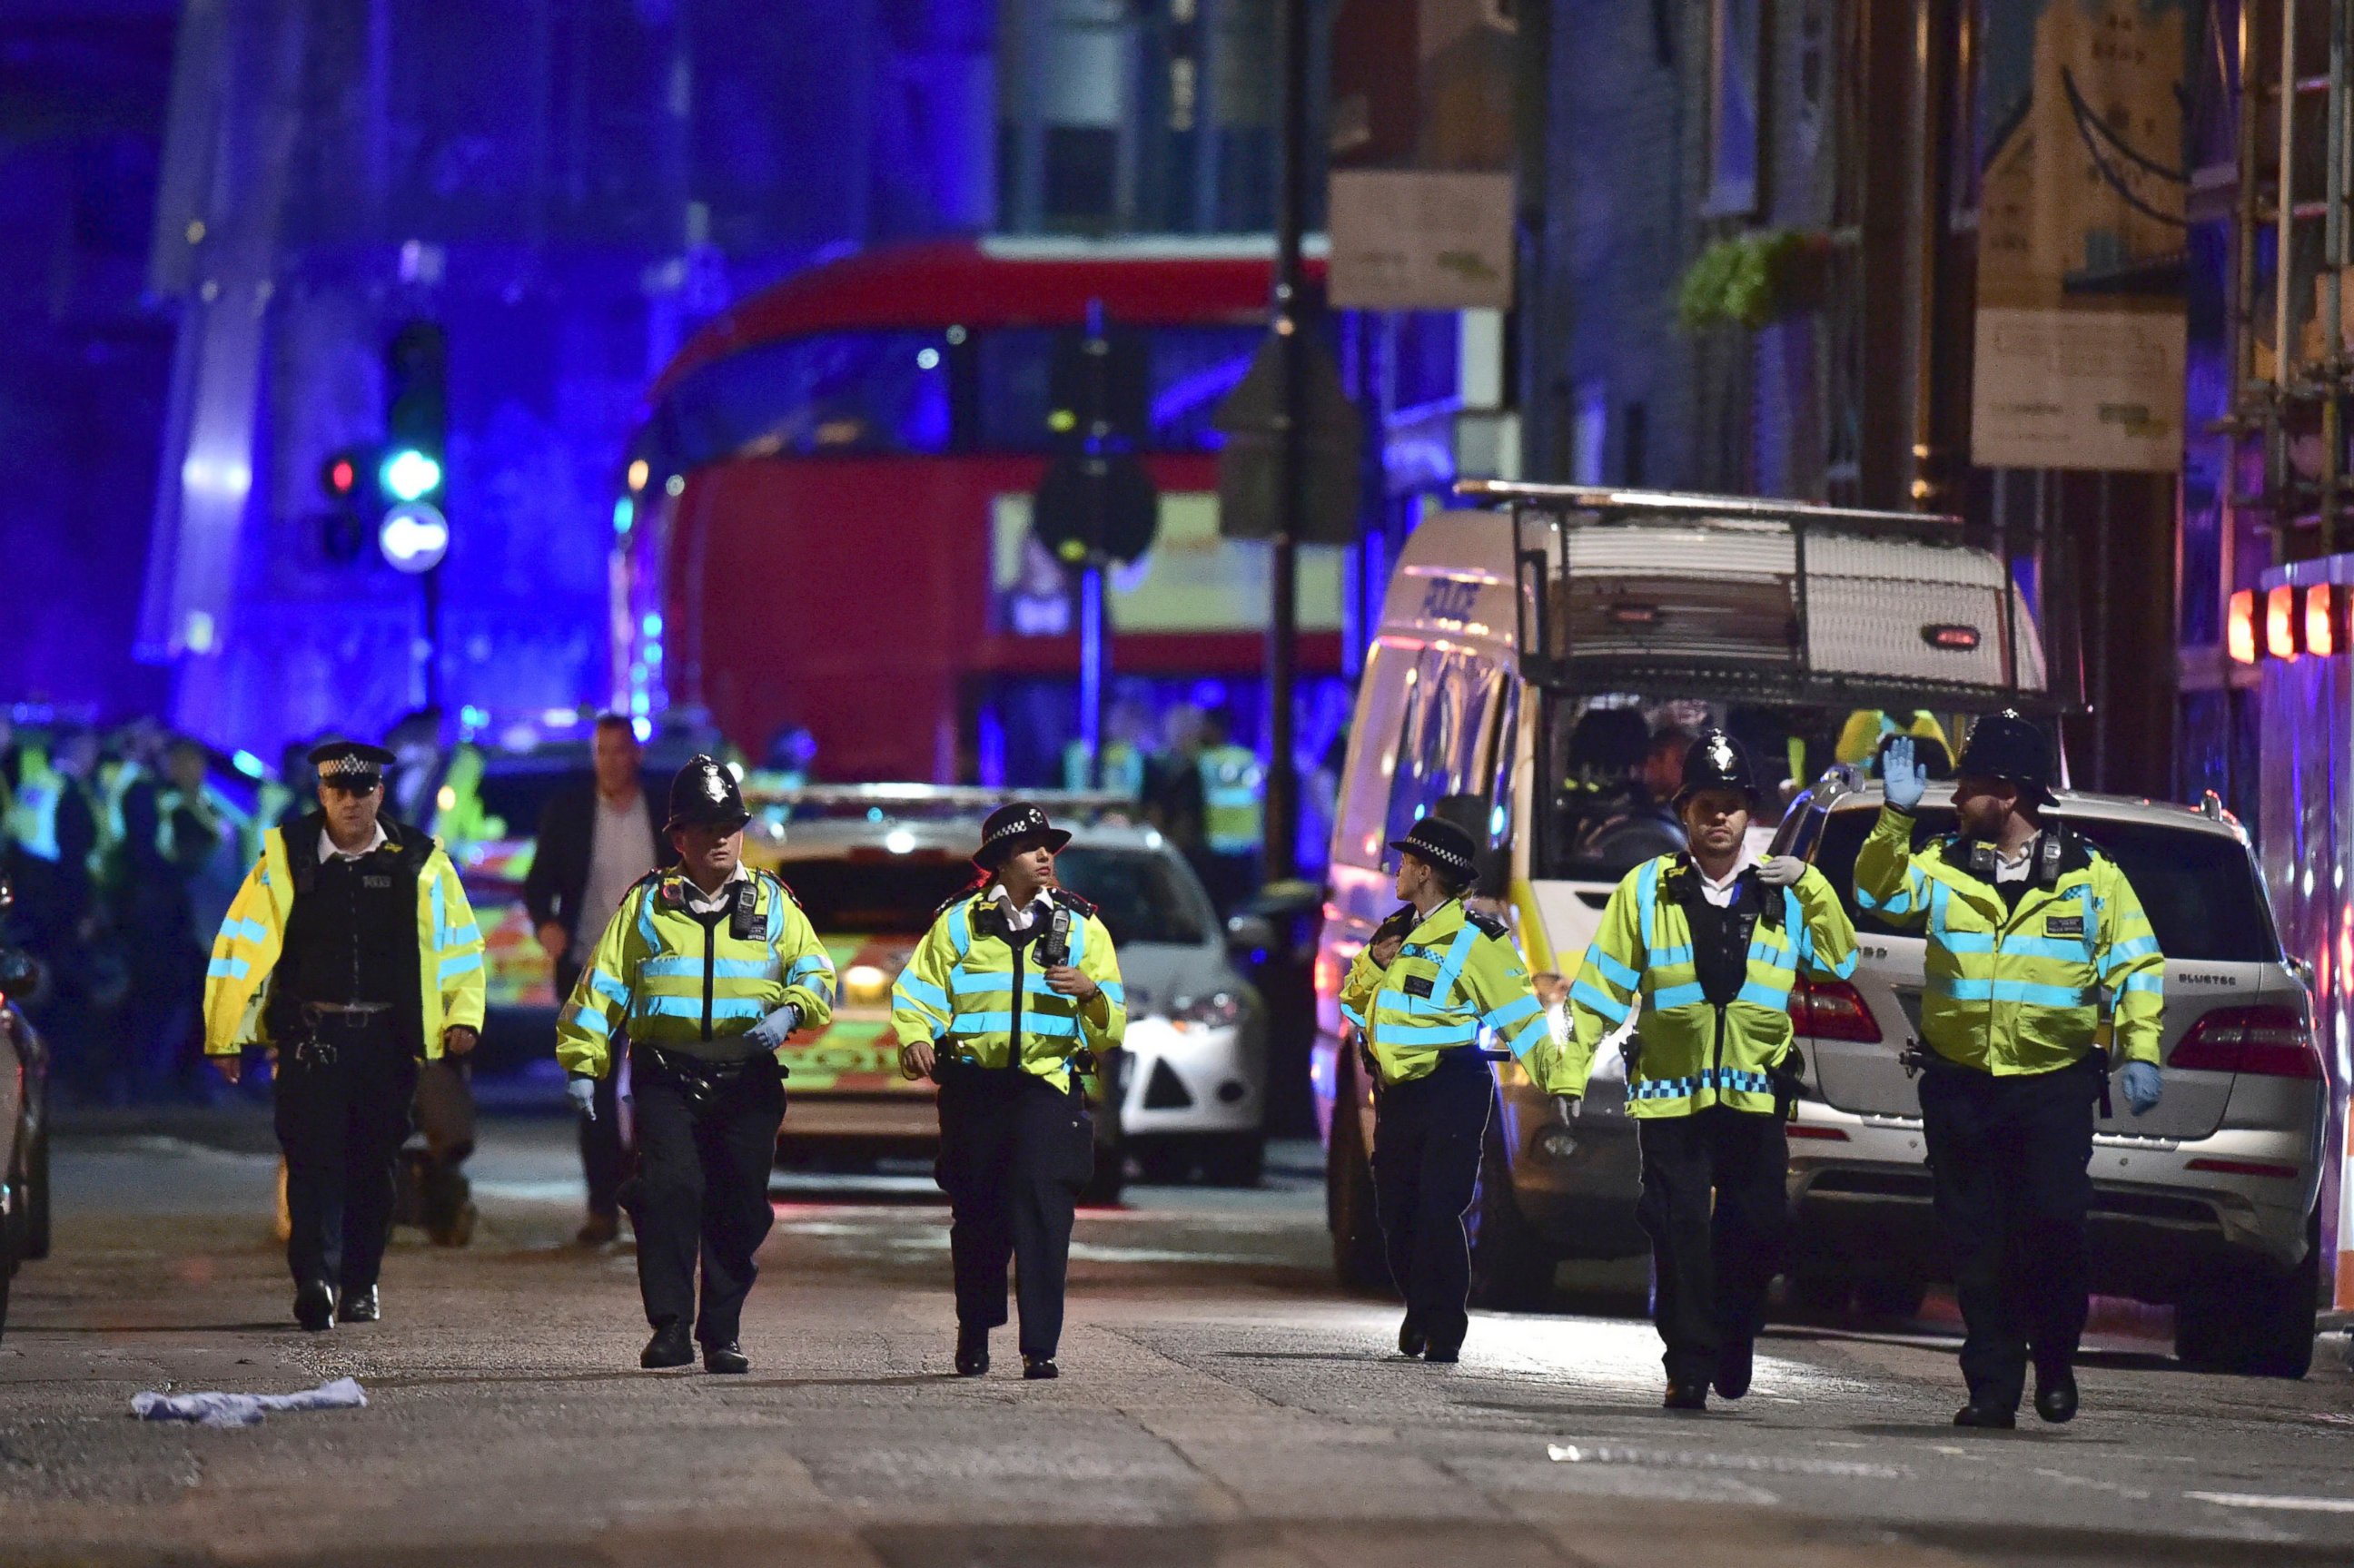 PHOTO: Police officers gather on Borough High Street as police deal with an incident on London Bridge in London, Saturday, June 3, 2017.